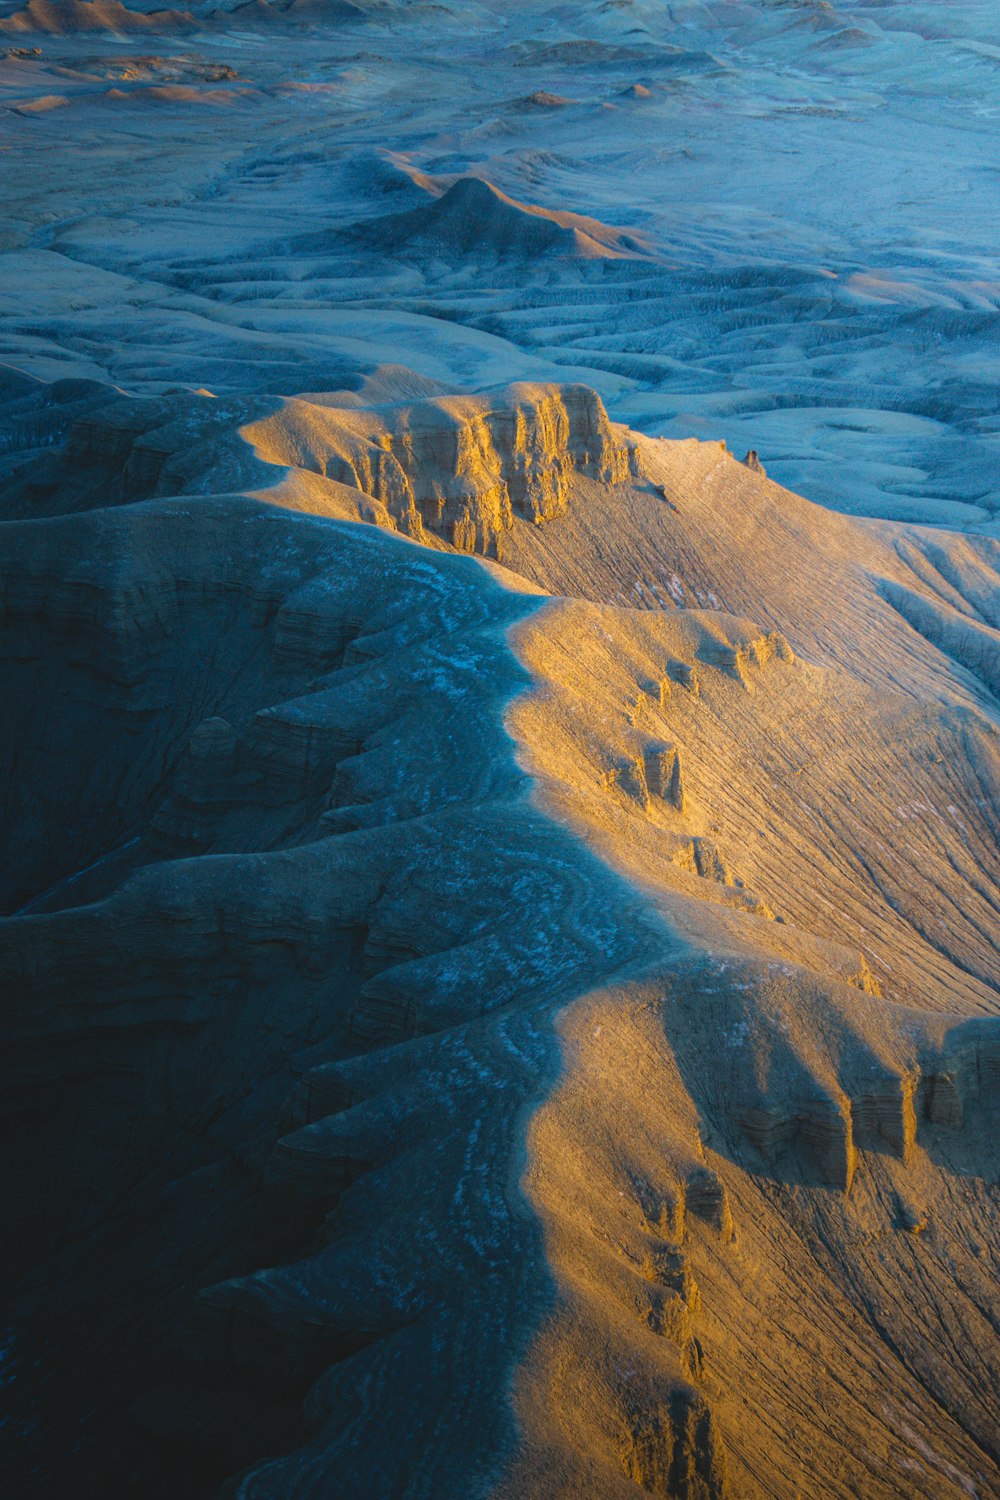 an aerial view of a mountain range at sunset